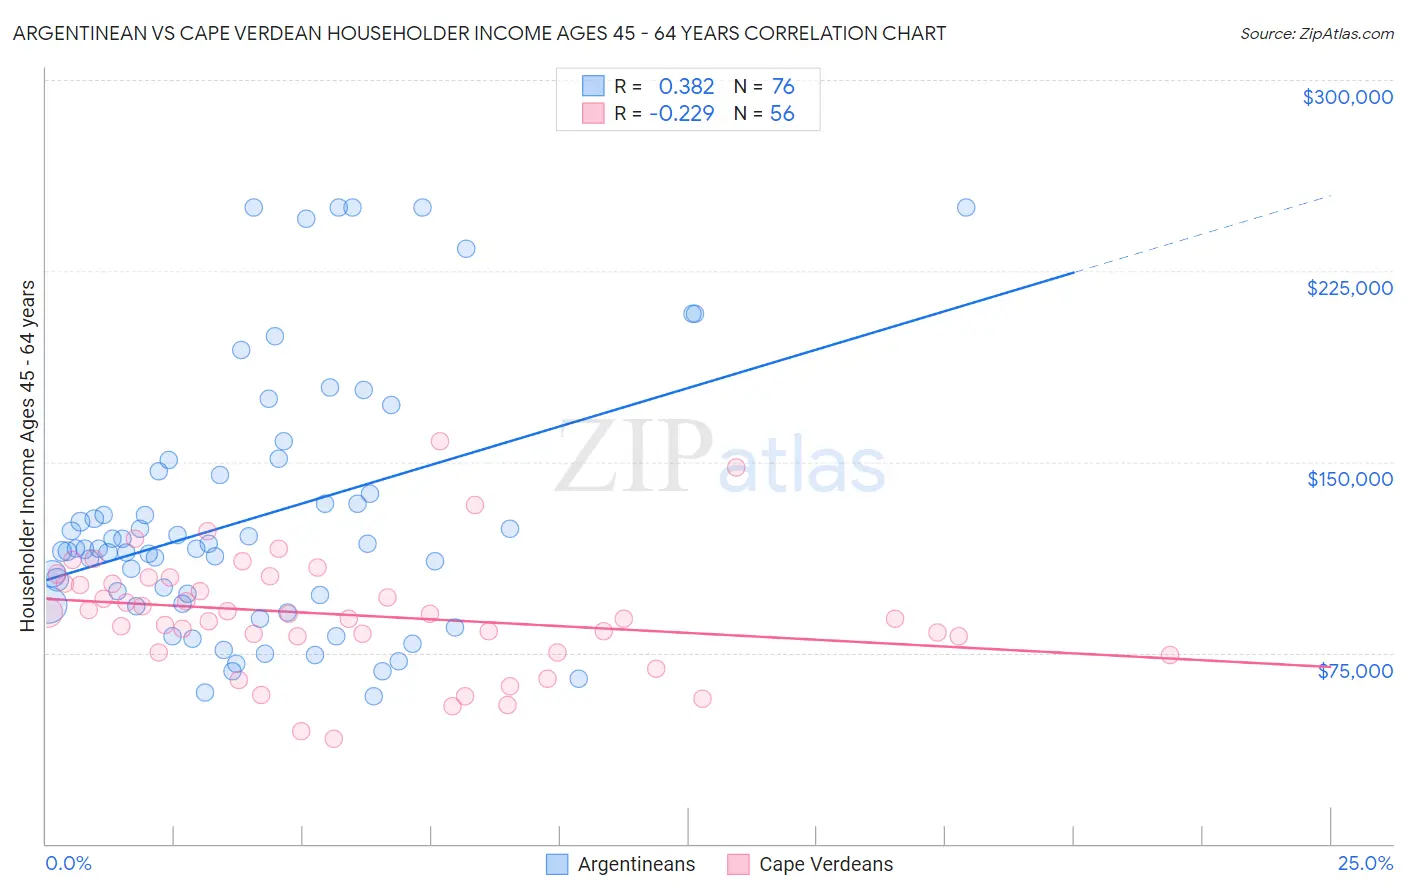 Argentinean vs Cape Verdean Householder Income Ages 45 - 64 years